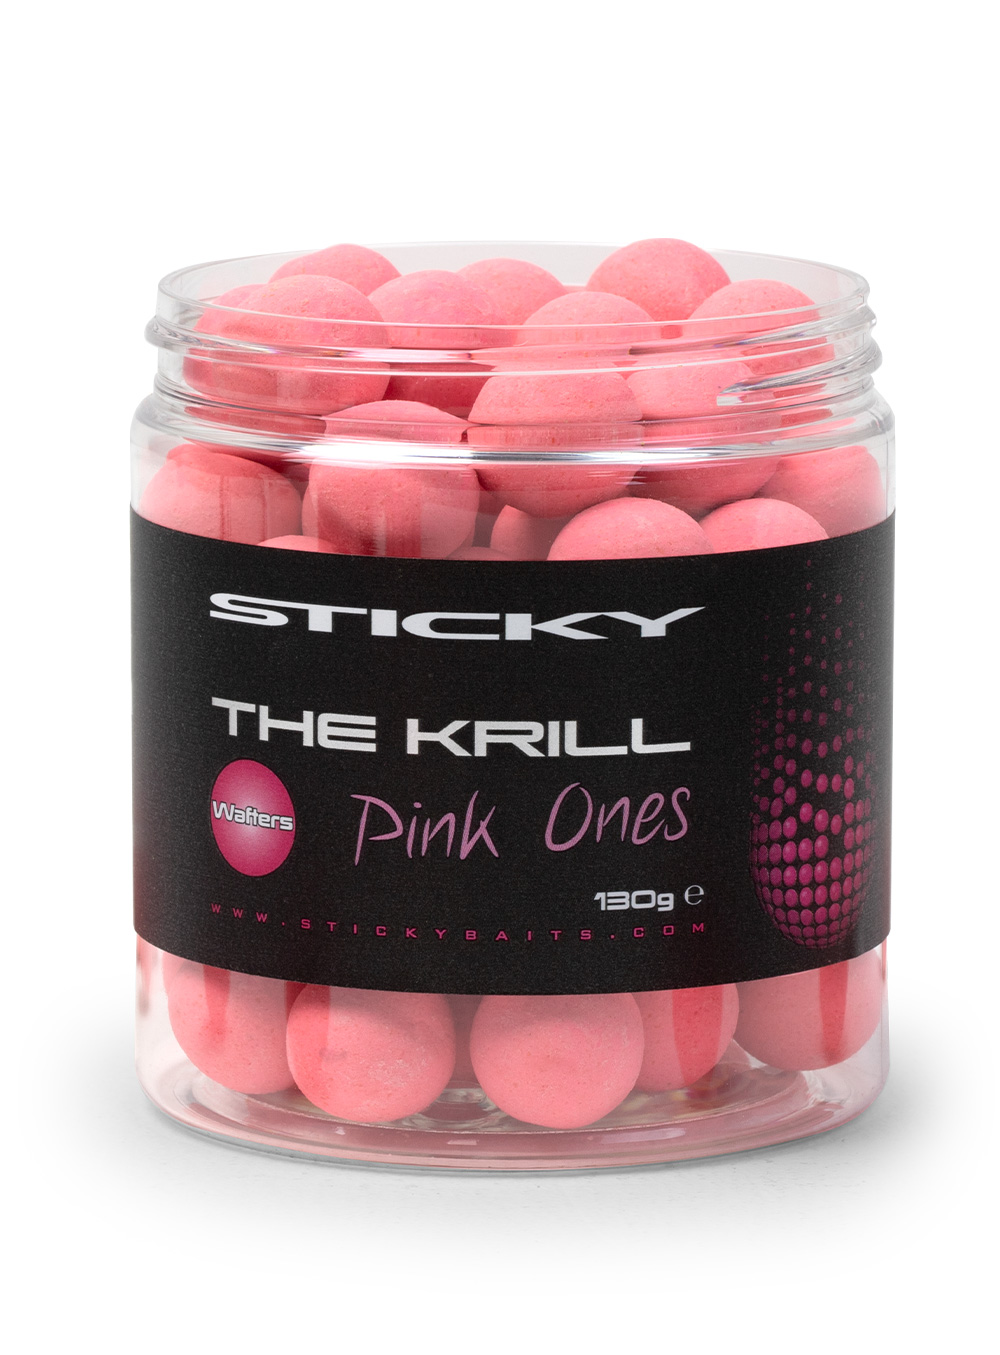 Sticky Baits The krill Wafters pink ones 16mm